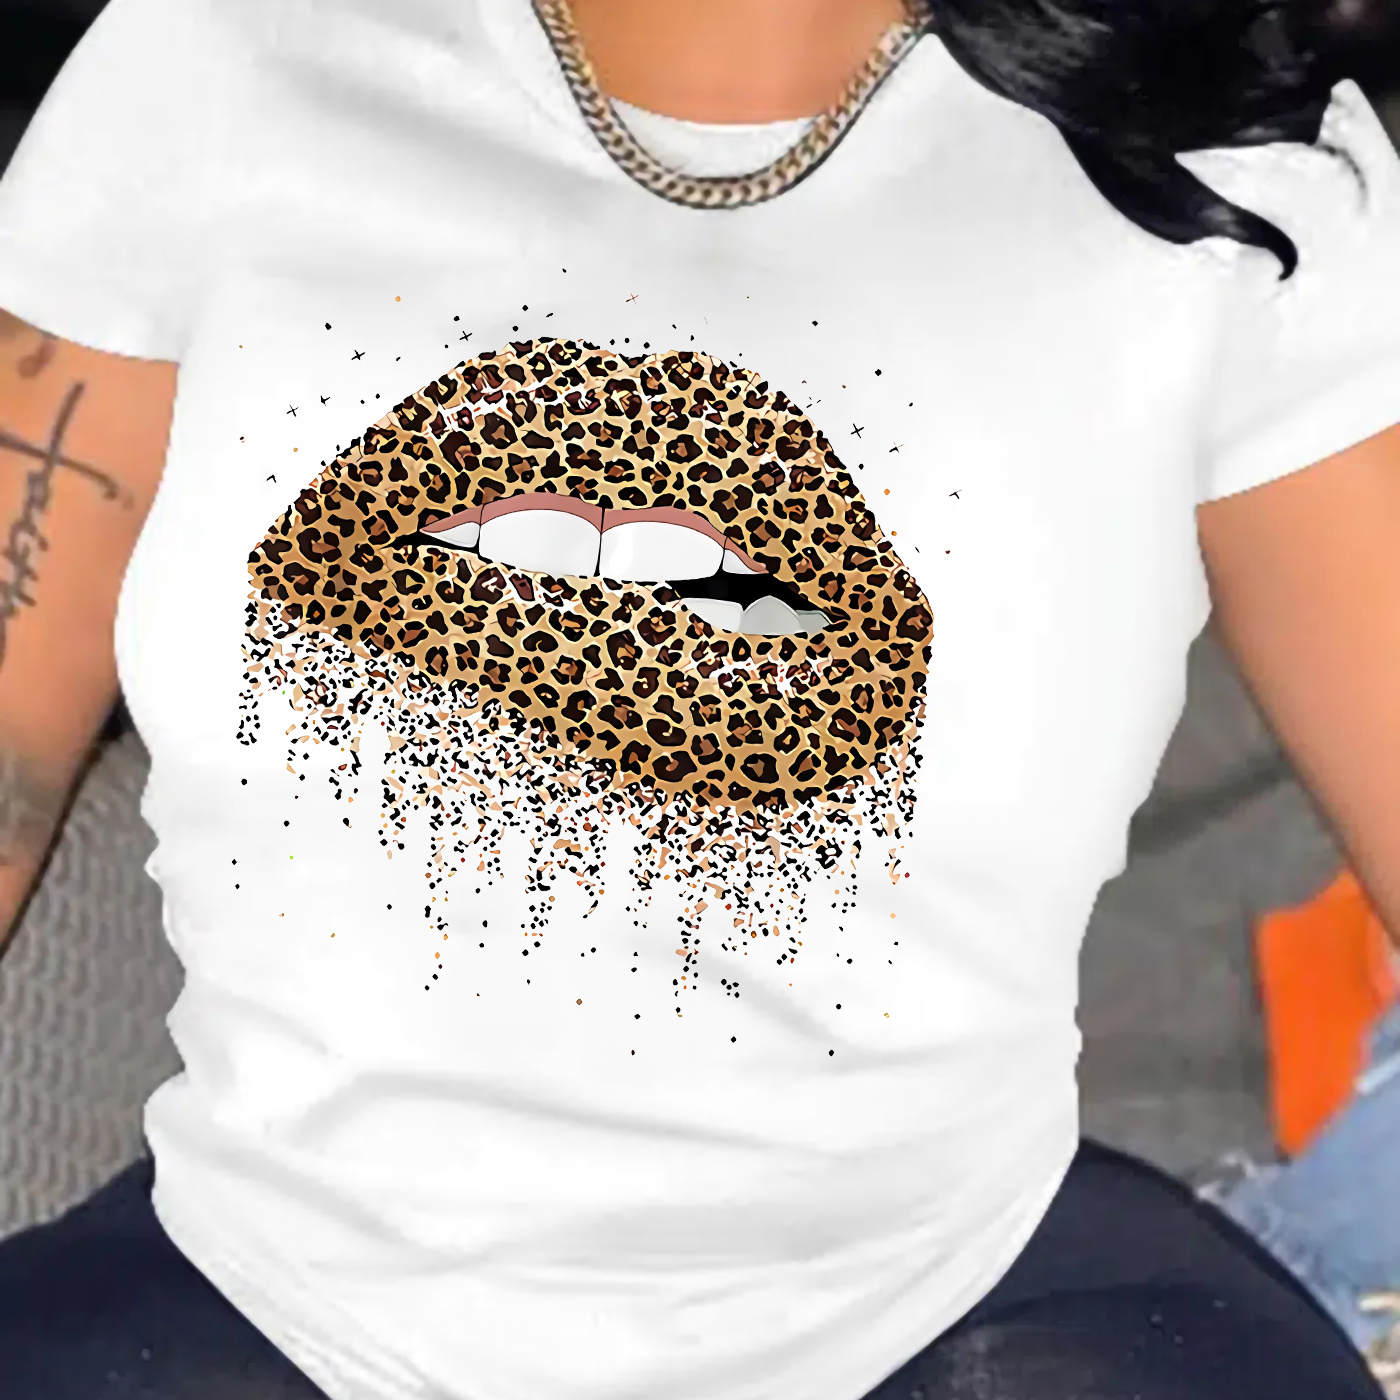 Leopard Lips Graphic Tee Shirt, Valentine's Day Crew Neck Short Sleeve Casual Everyday Tops, Women's Clothing